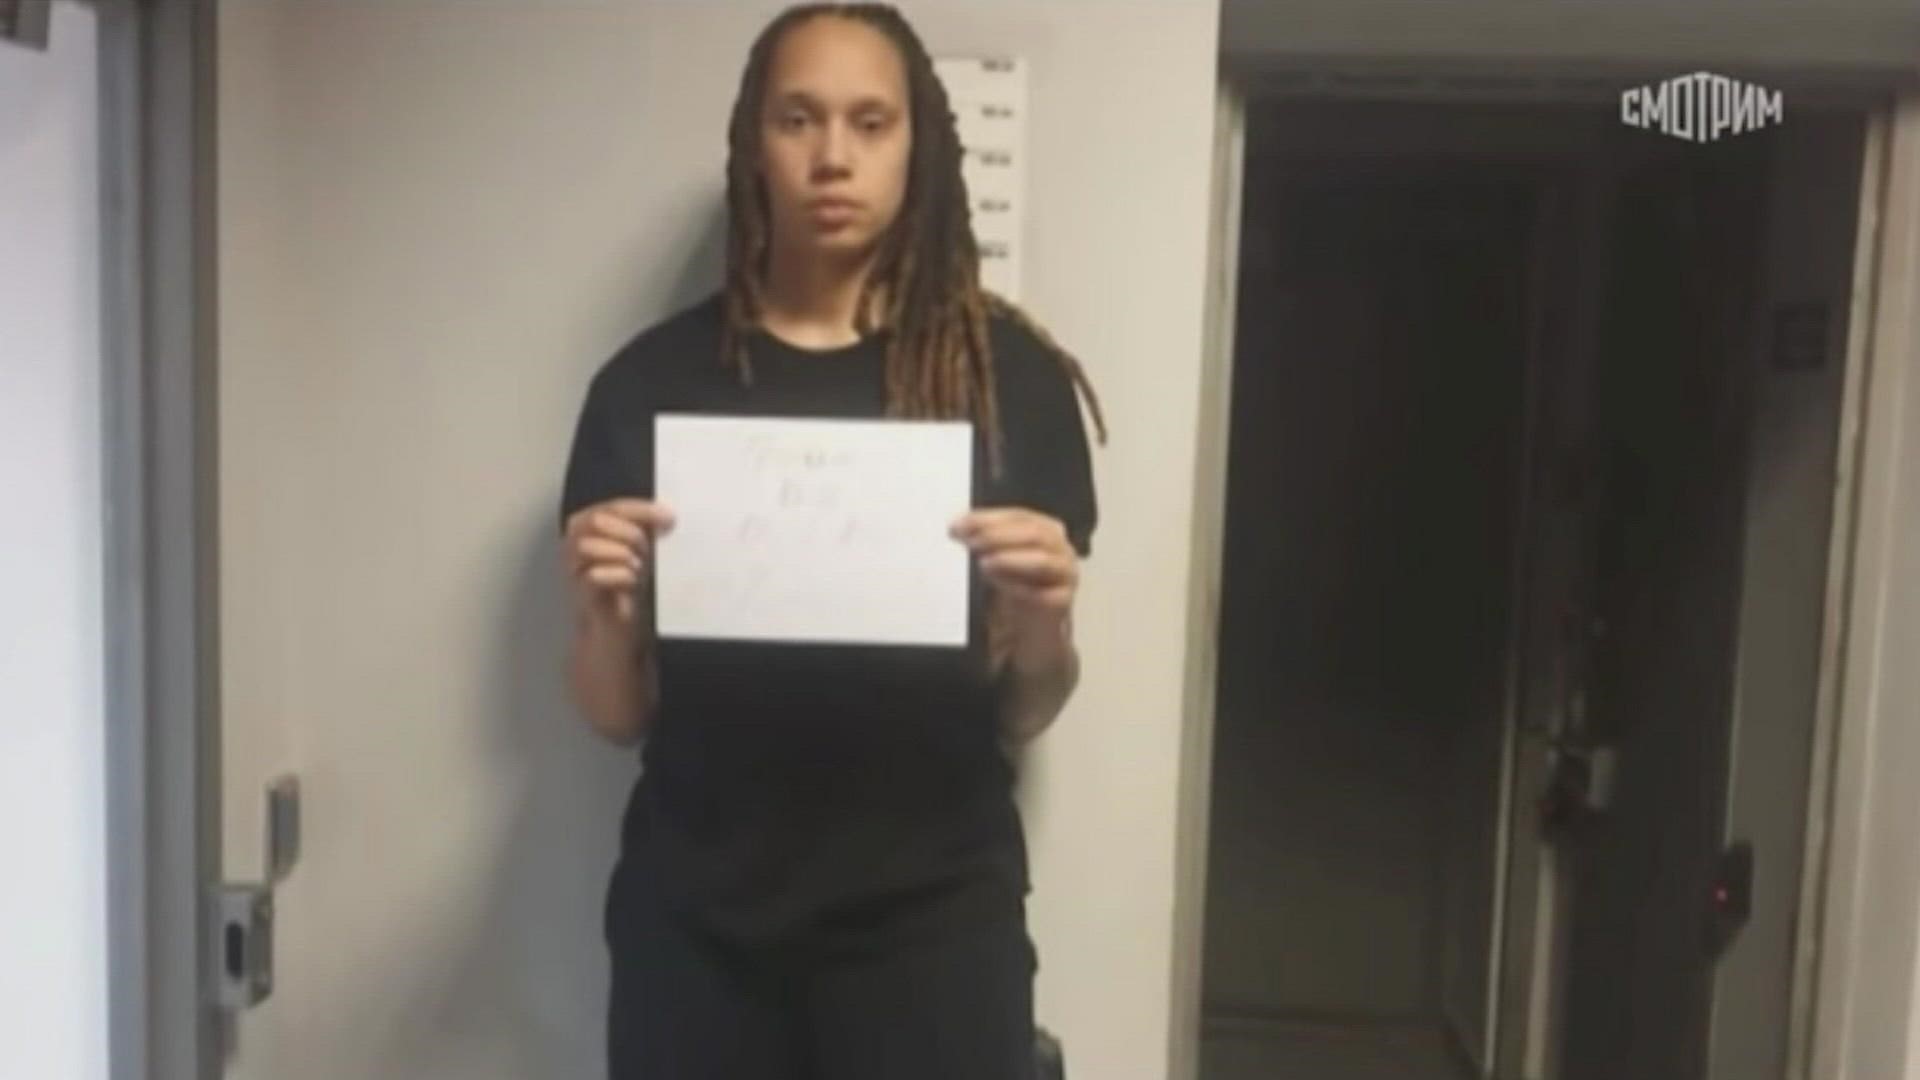 Griner is said to be in good spirits after a meeting with U.S. officials.